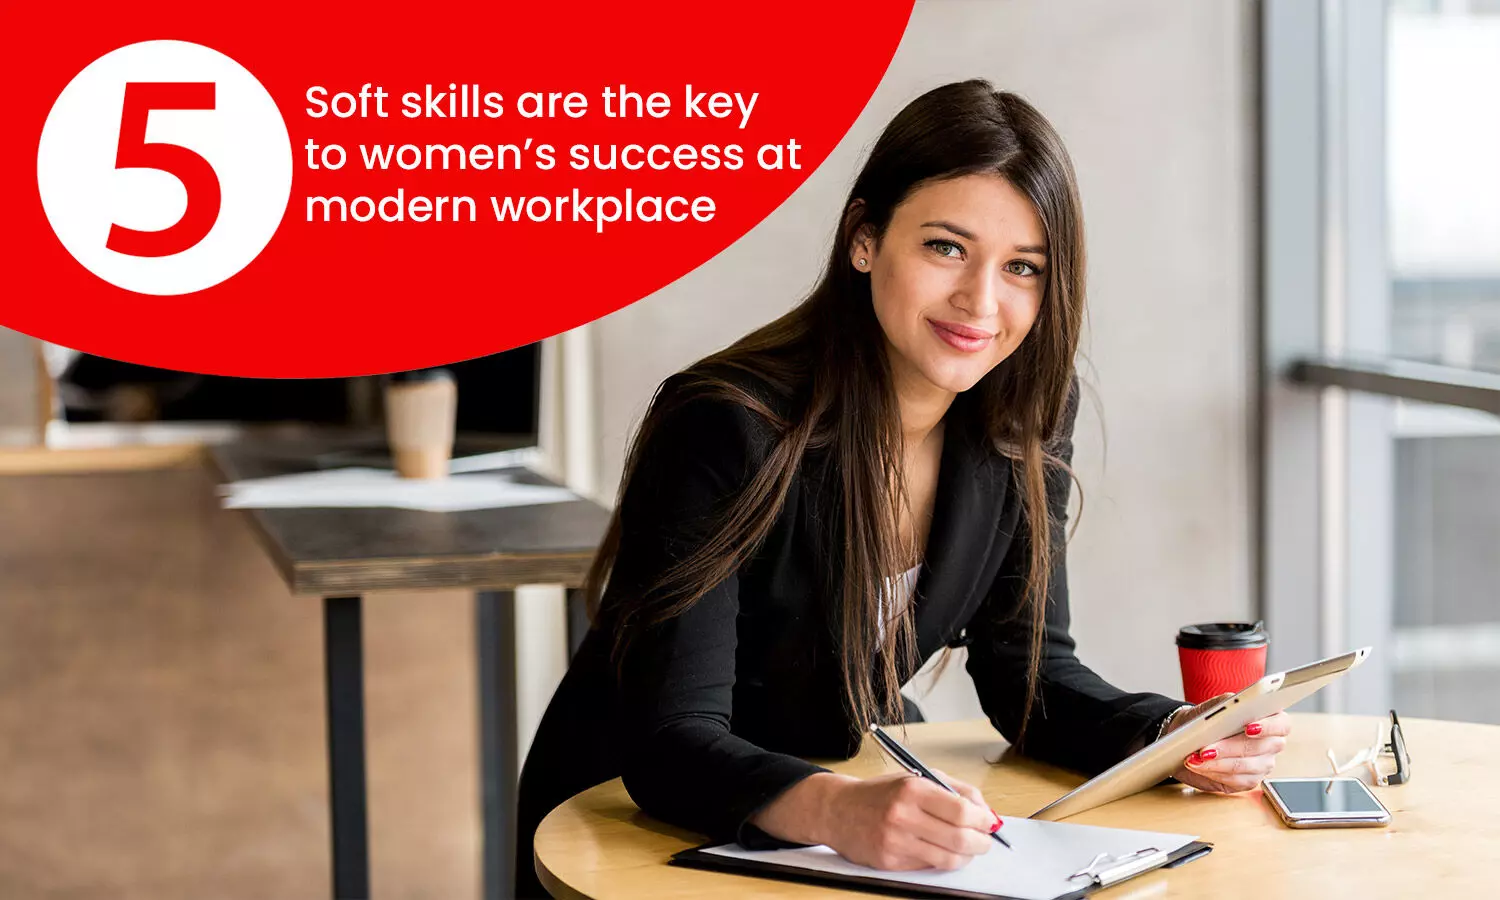 Soft skills are the key to women’s success at modern workplace